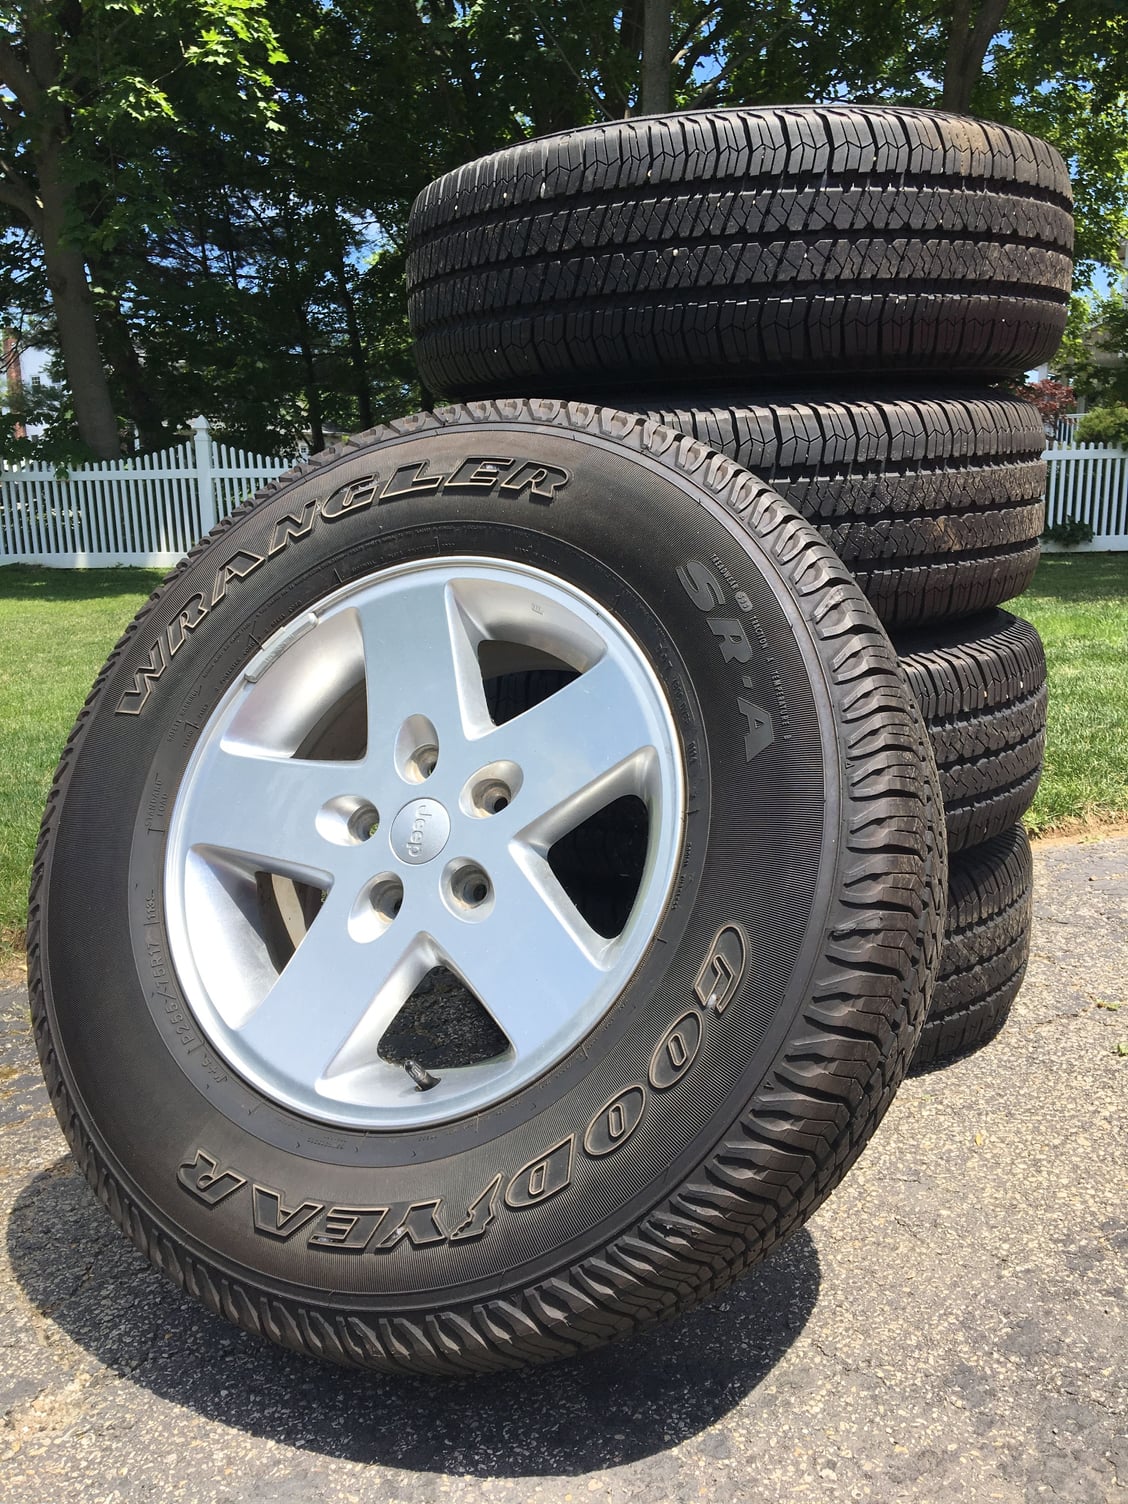 Wheels and Tires/Axles - Stock Sport S Wheels and Tires - Used - Smithtown, NY 11787, United States